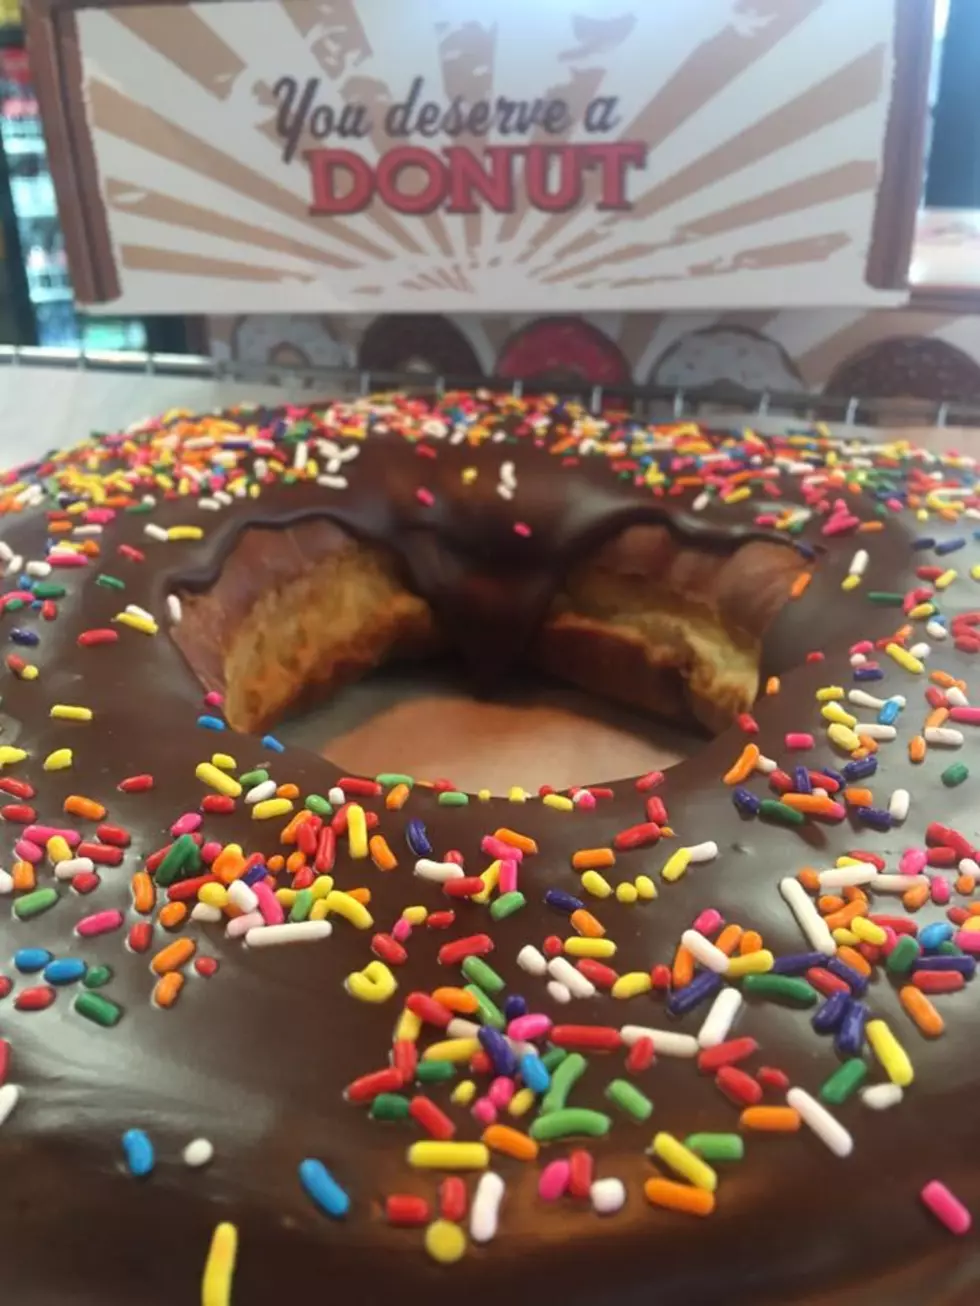 Tackle the Mega Donut Challenge at the Donut Factory